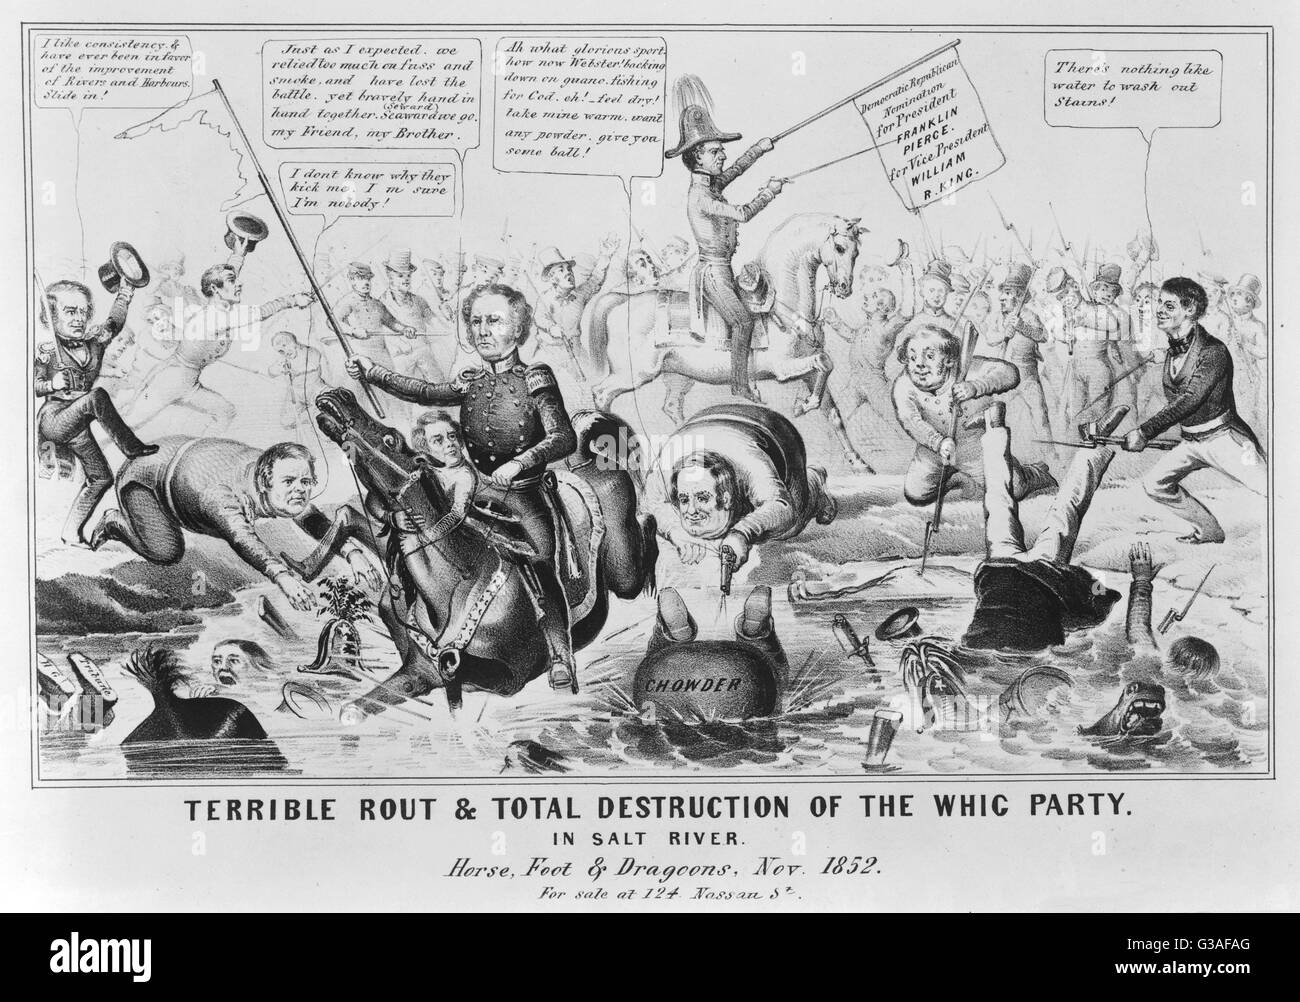 Terrible rout &amp; total destruction of the Whig Party. In Salt River. The 1852 Democratic victory under the standard of Franklin Pierce is foreseen as a debacle for the Whig party, led by Winfield Scott. Pierce (center) sits on his horse, holding aloft Stock Photo